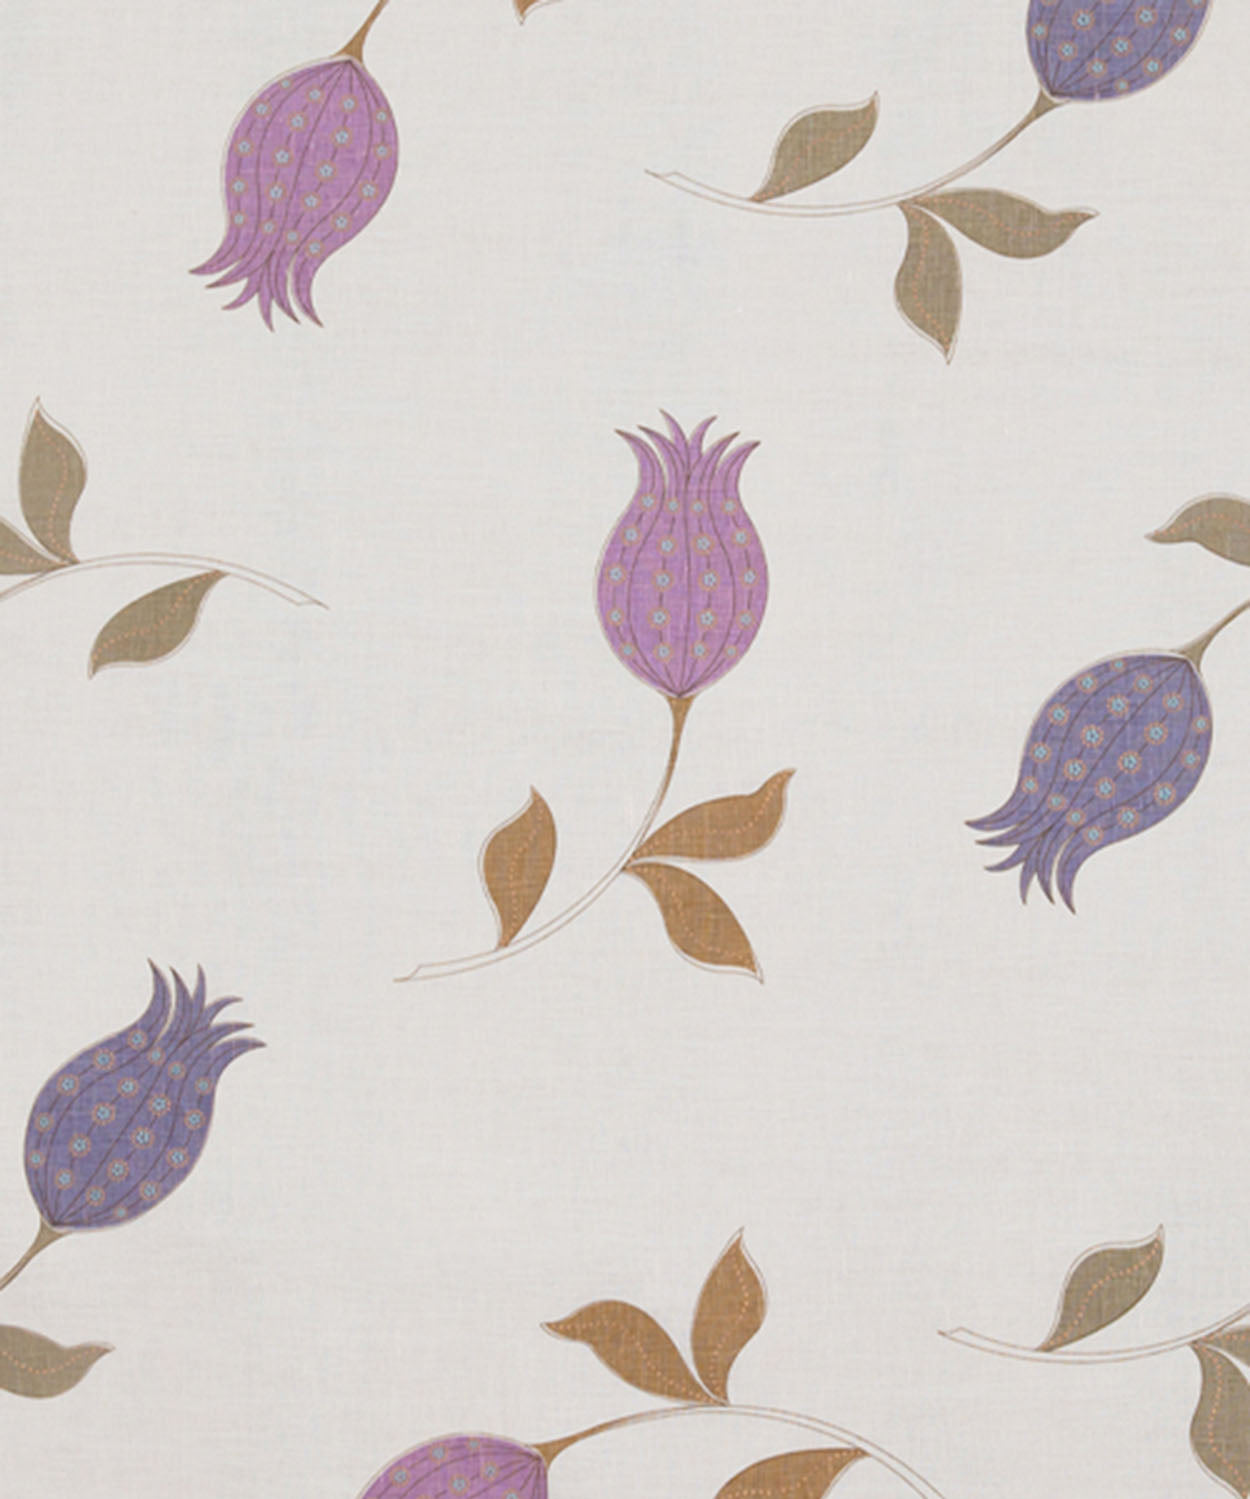 Fabric with a large-scale tulip print in shades of purple and brown on a cream field.